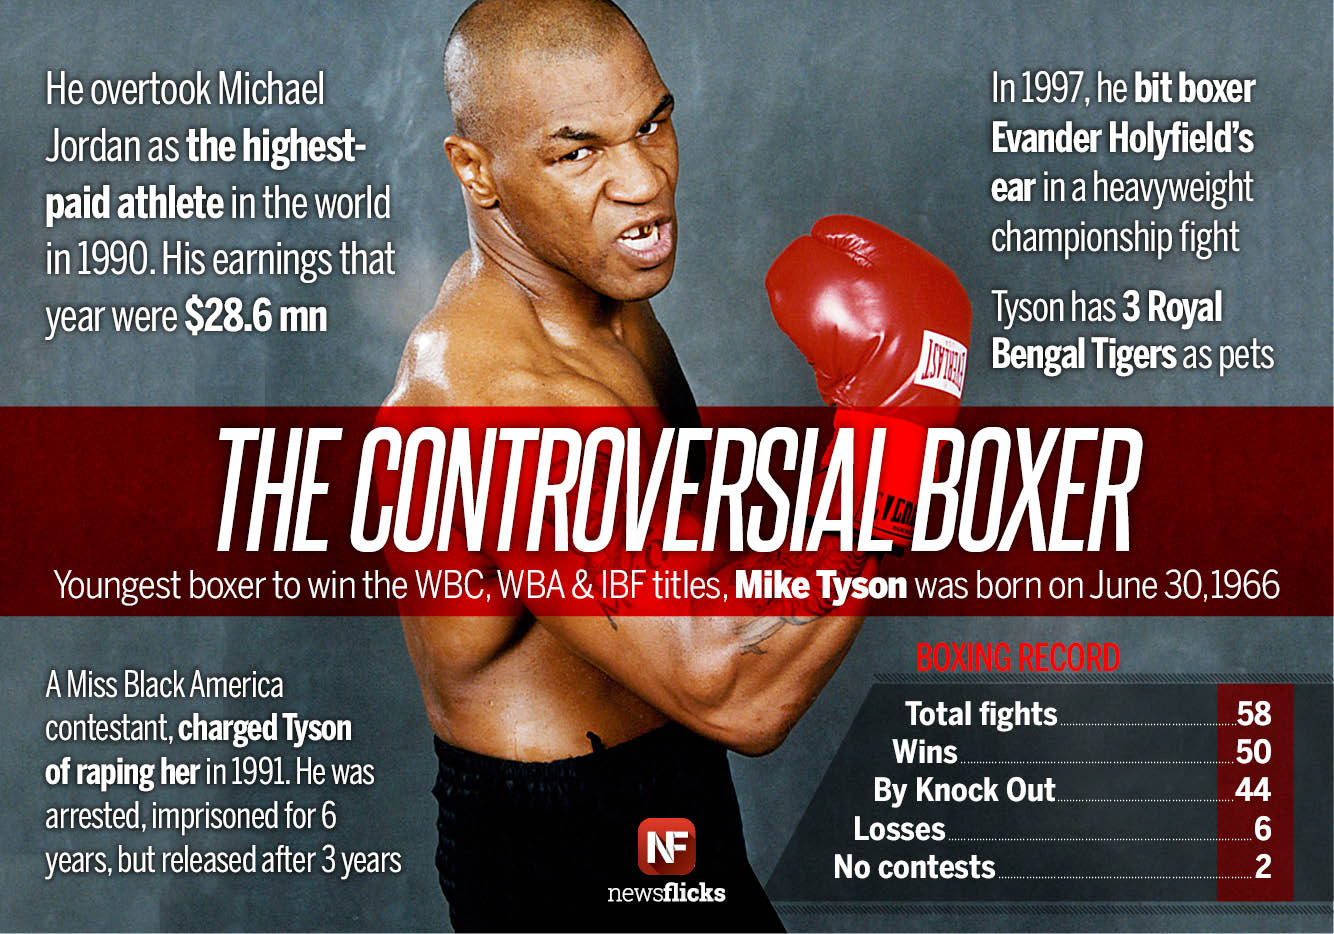 Newsflicks on Twitter: Tyson, the boxer who, at age became youngest heavyweight champion in was born on June 30, 1966 https://t.co/odgFUPteN4" / Twitter